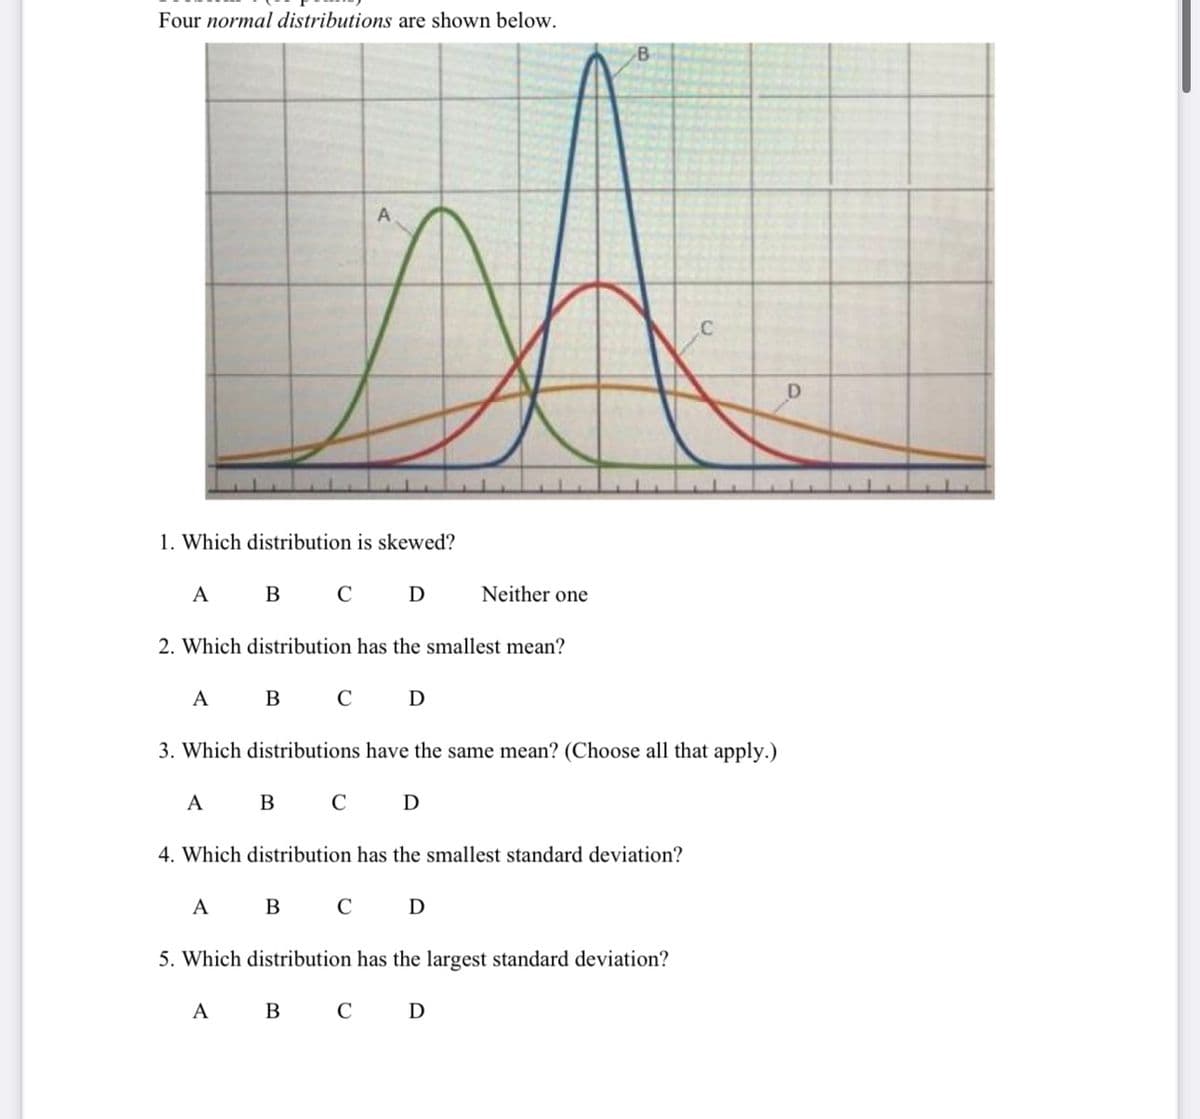 Four normal distributions are shown below.
A
1. Which distribution is skewed?
A B C D
Neither one
2. Which distribution has the smallest mean?
A B C D
3. Which distributions have the same mean? (Choose all that apply.)
A
B C D
4. Which distribution has the smallest standard deviation?
A B C D
5. Which distribution has the largest standard deviation?
A B C D
D